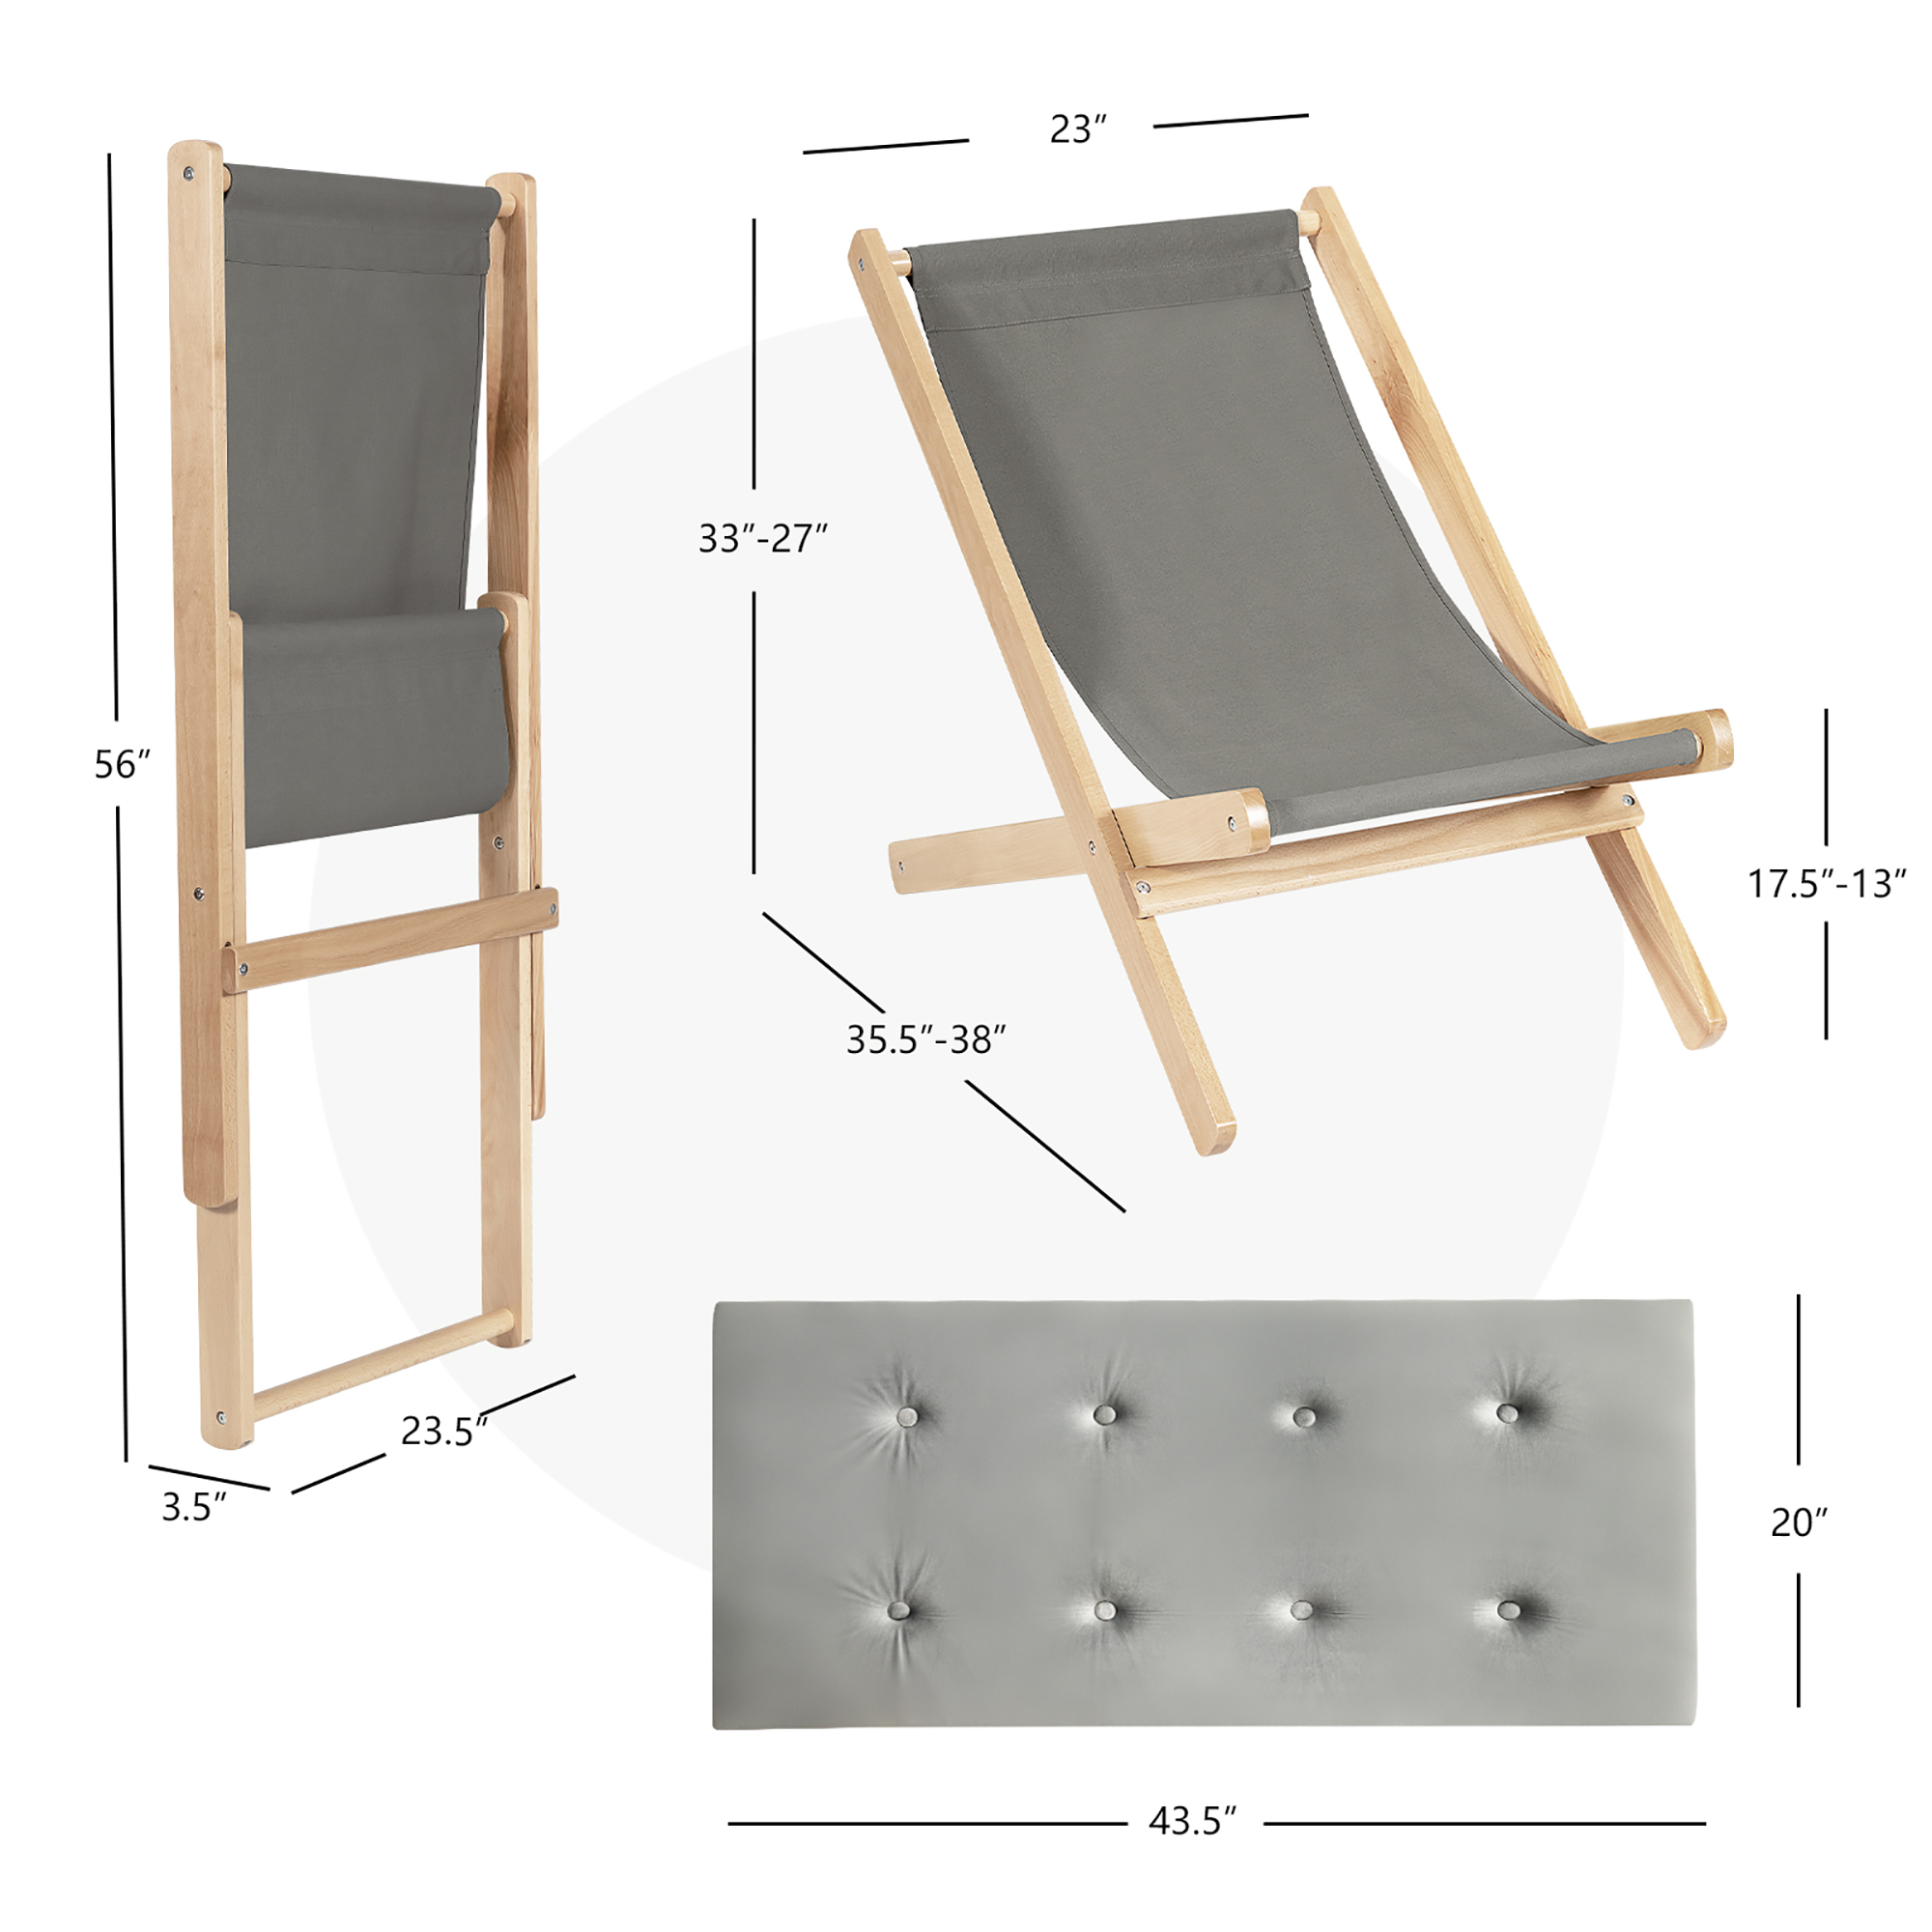 Costway Foldable Wood Beach Sling Chair 3-Position Adjustable Beech Chair w/Free Cushion - image 3 of 9